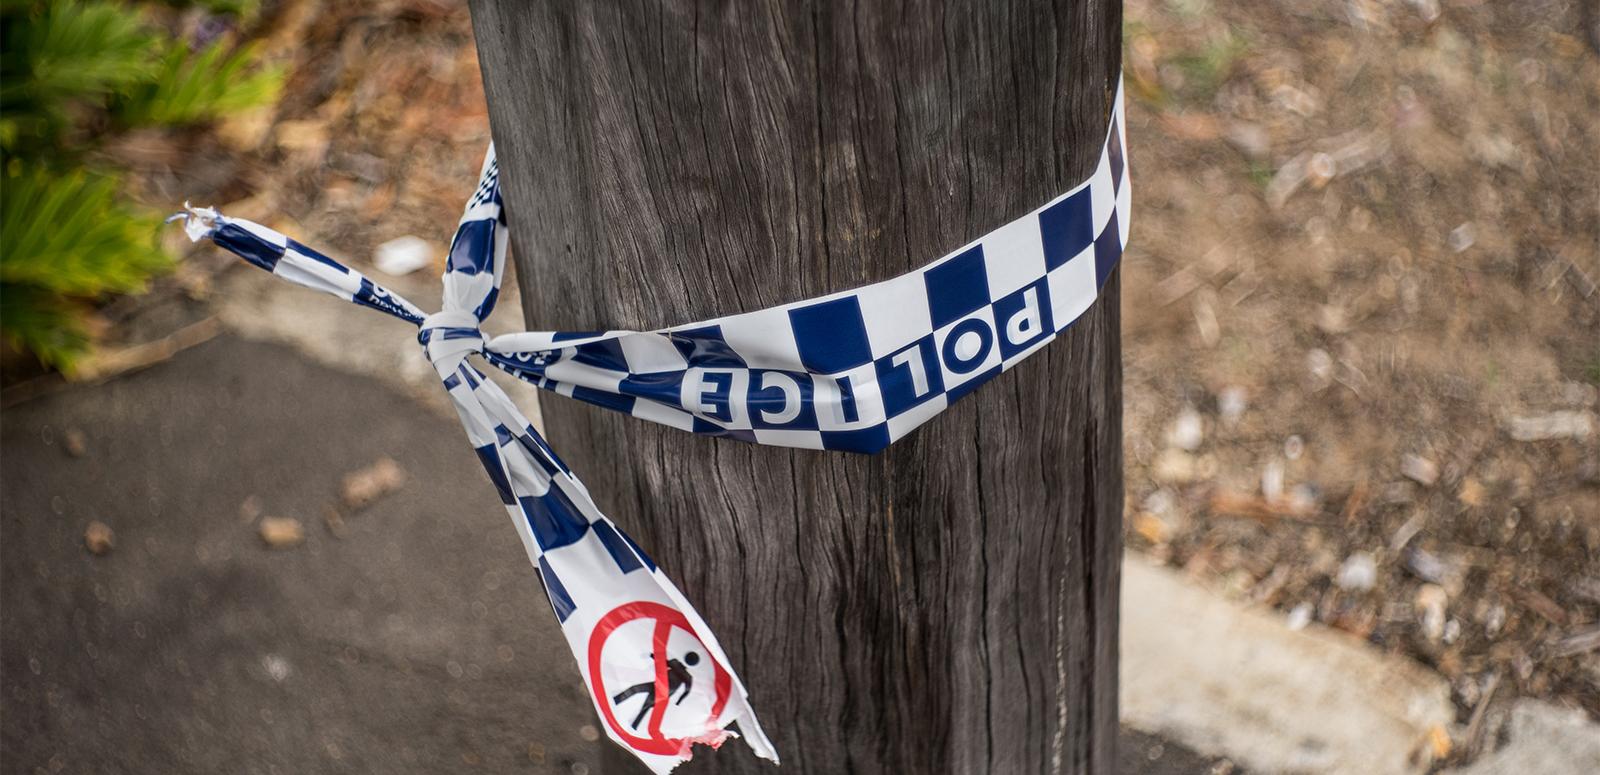 A section of a telegraph pole on a sidewalk with some blue and white chequered police tape tied around it.